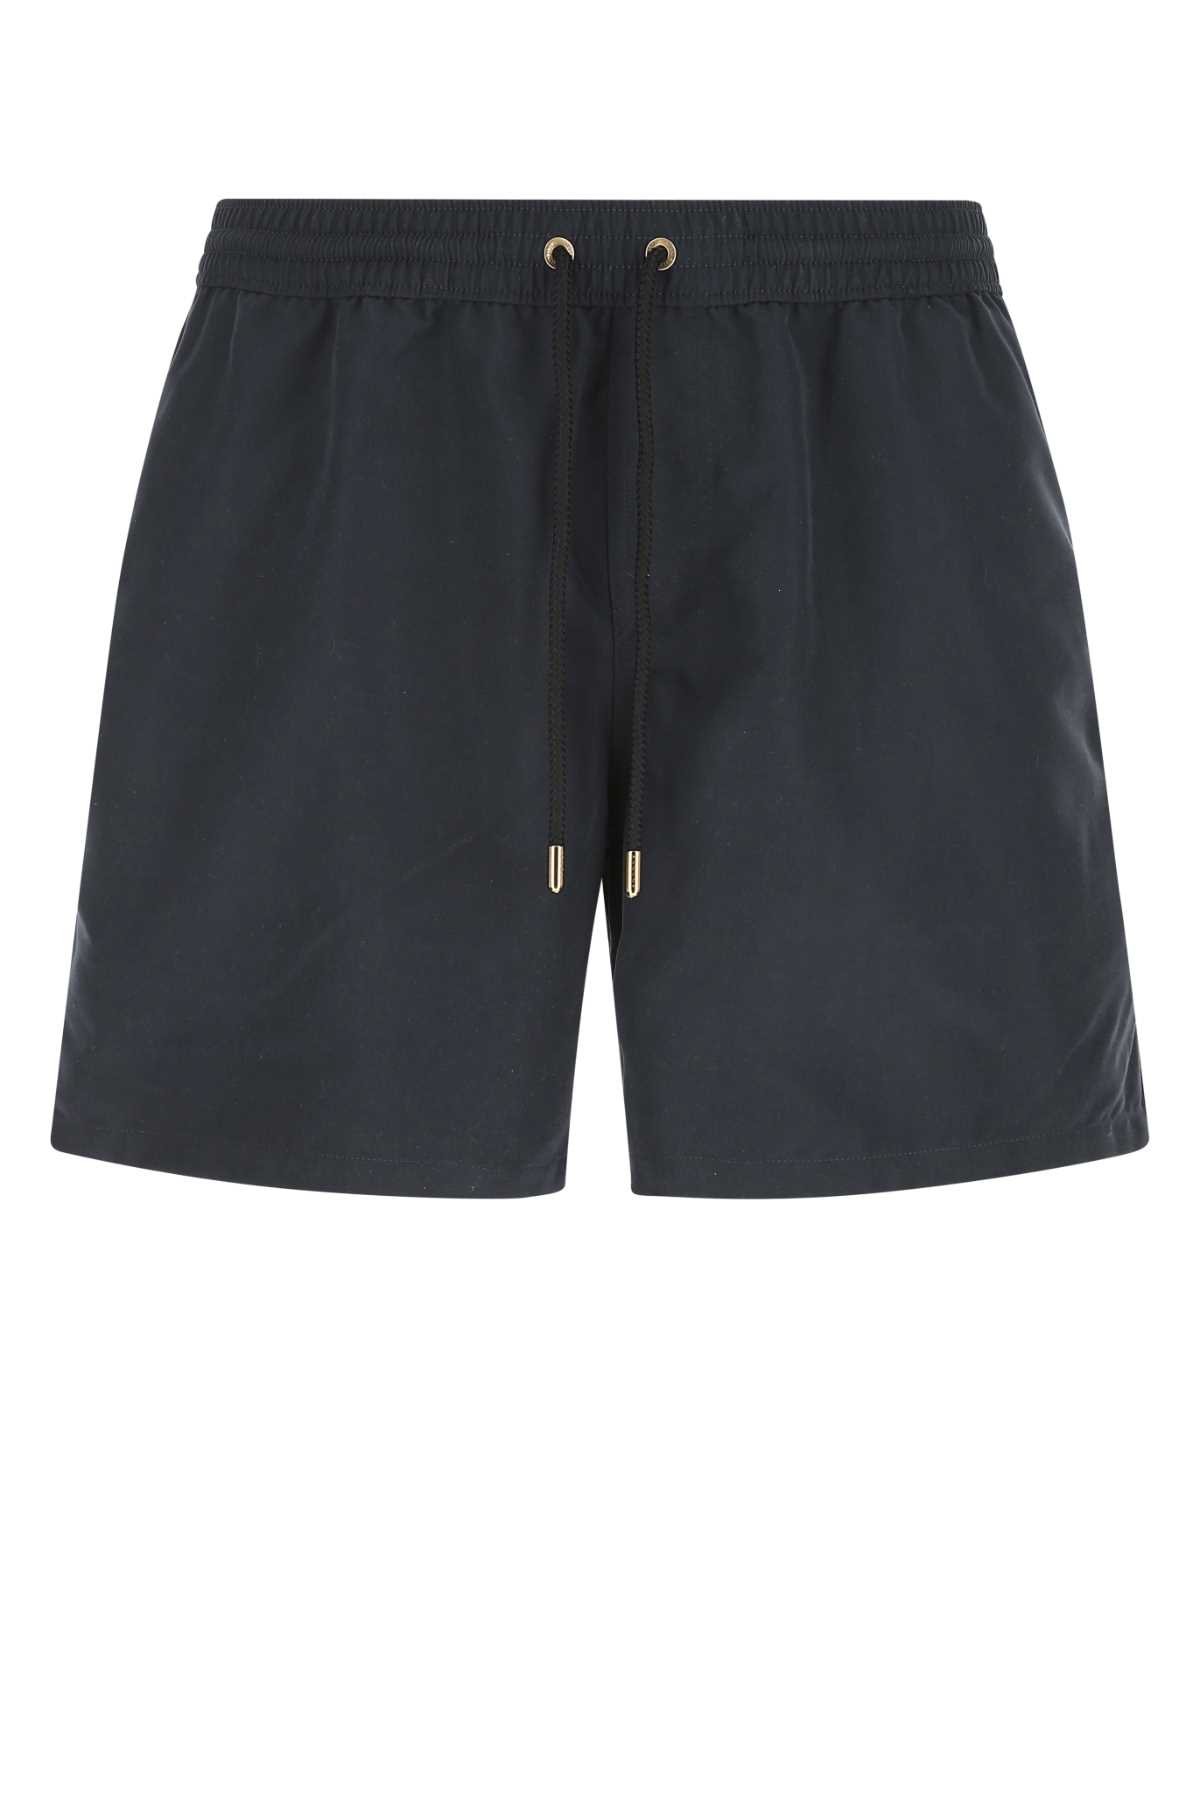 Navy Blue Polyester Swimming Shorts